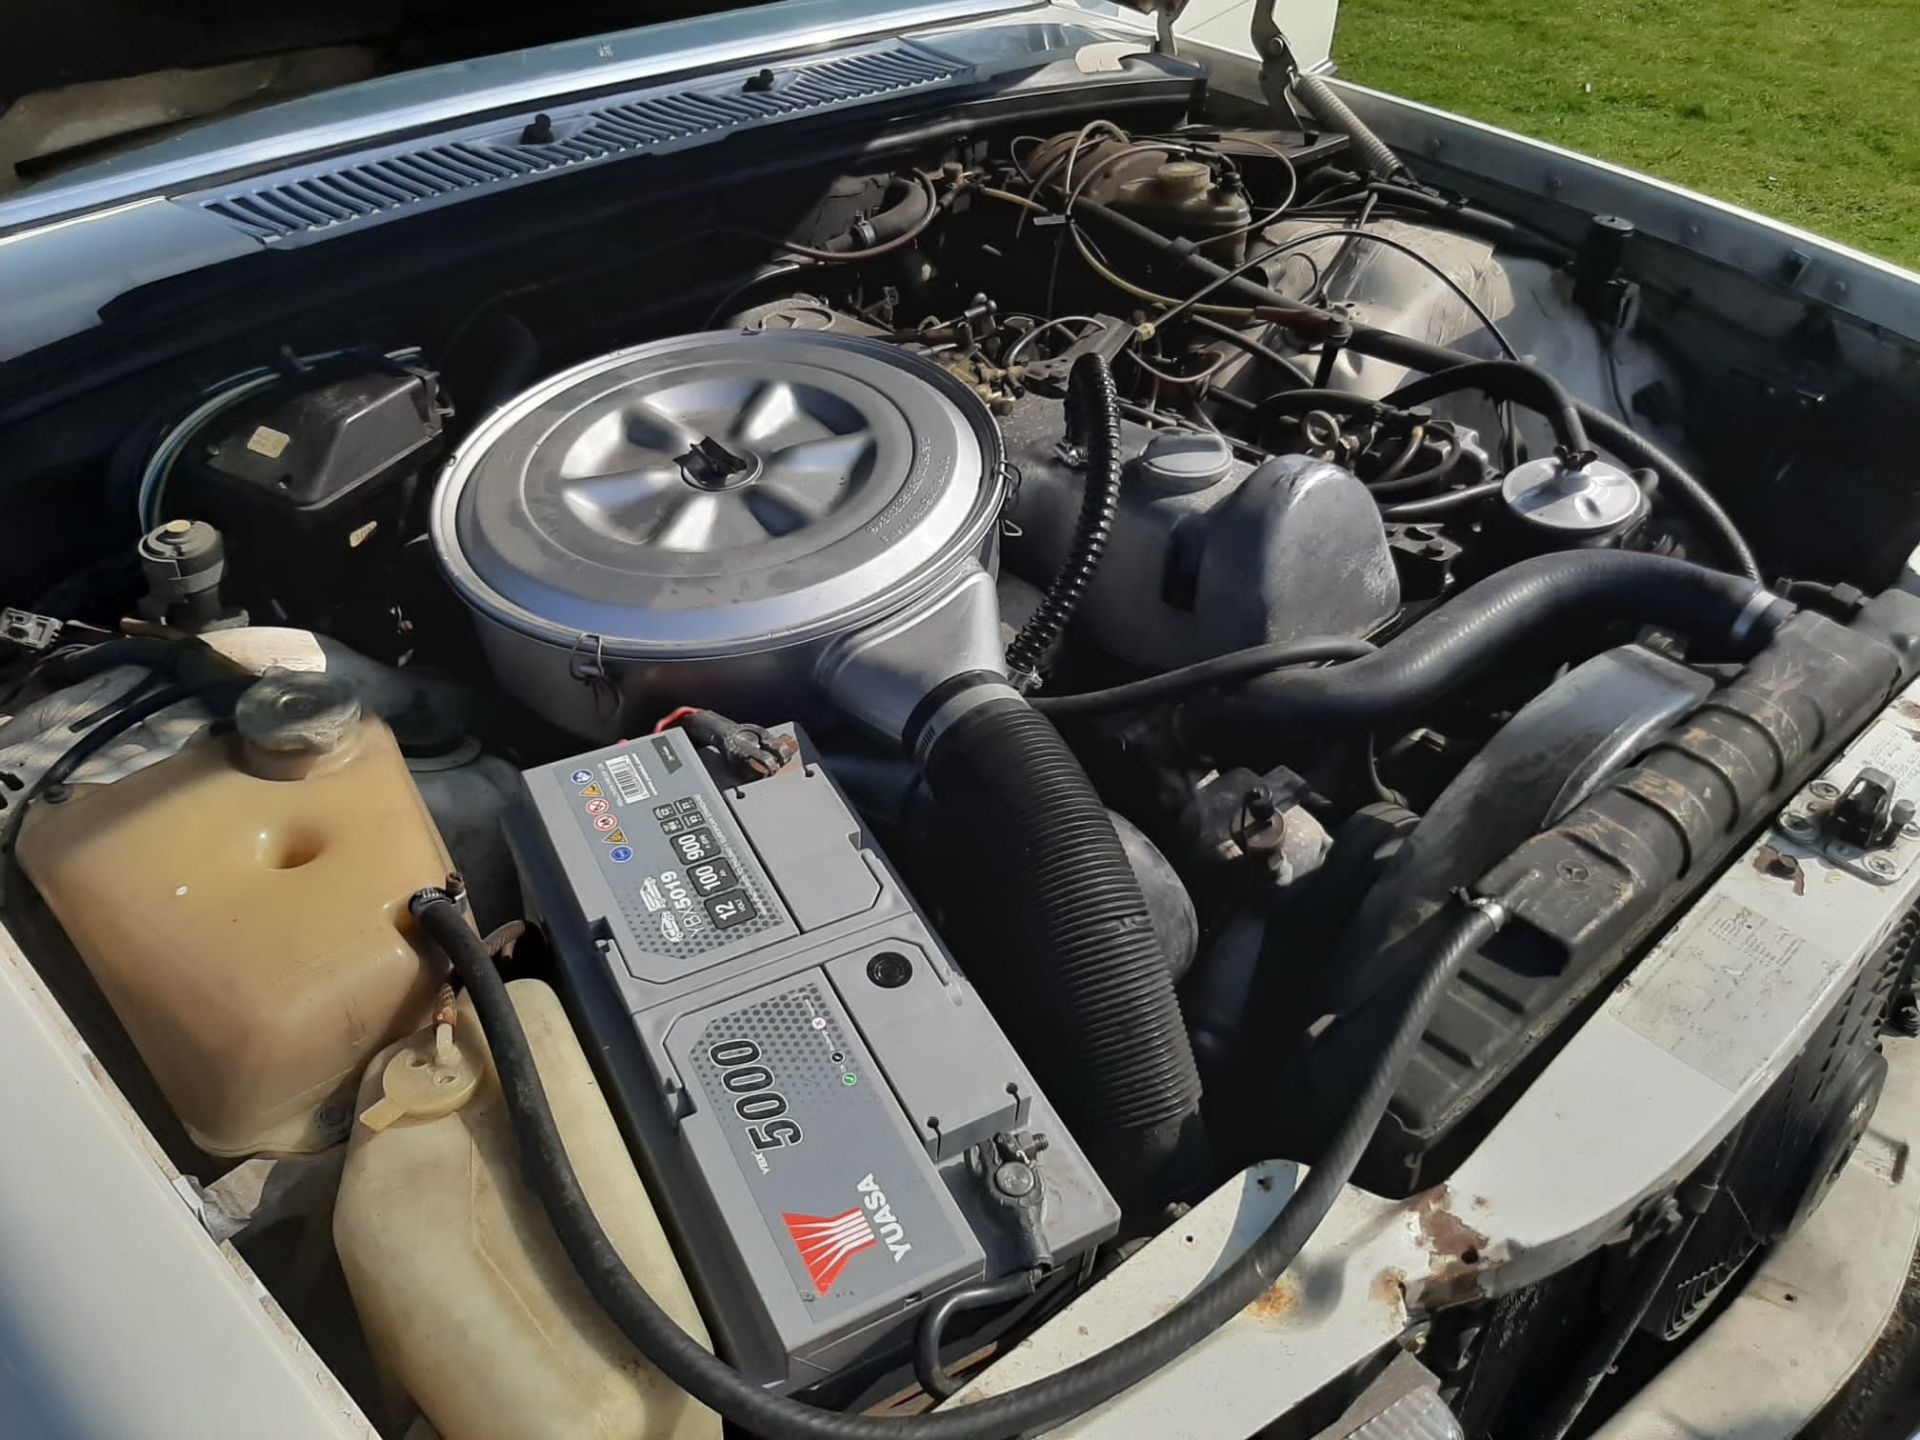 1980 Mercedes 300 SD Turbo Diesel LHD - Image 10 of 23